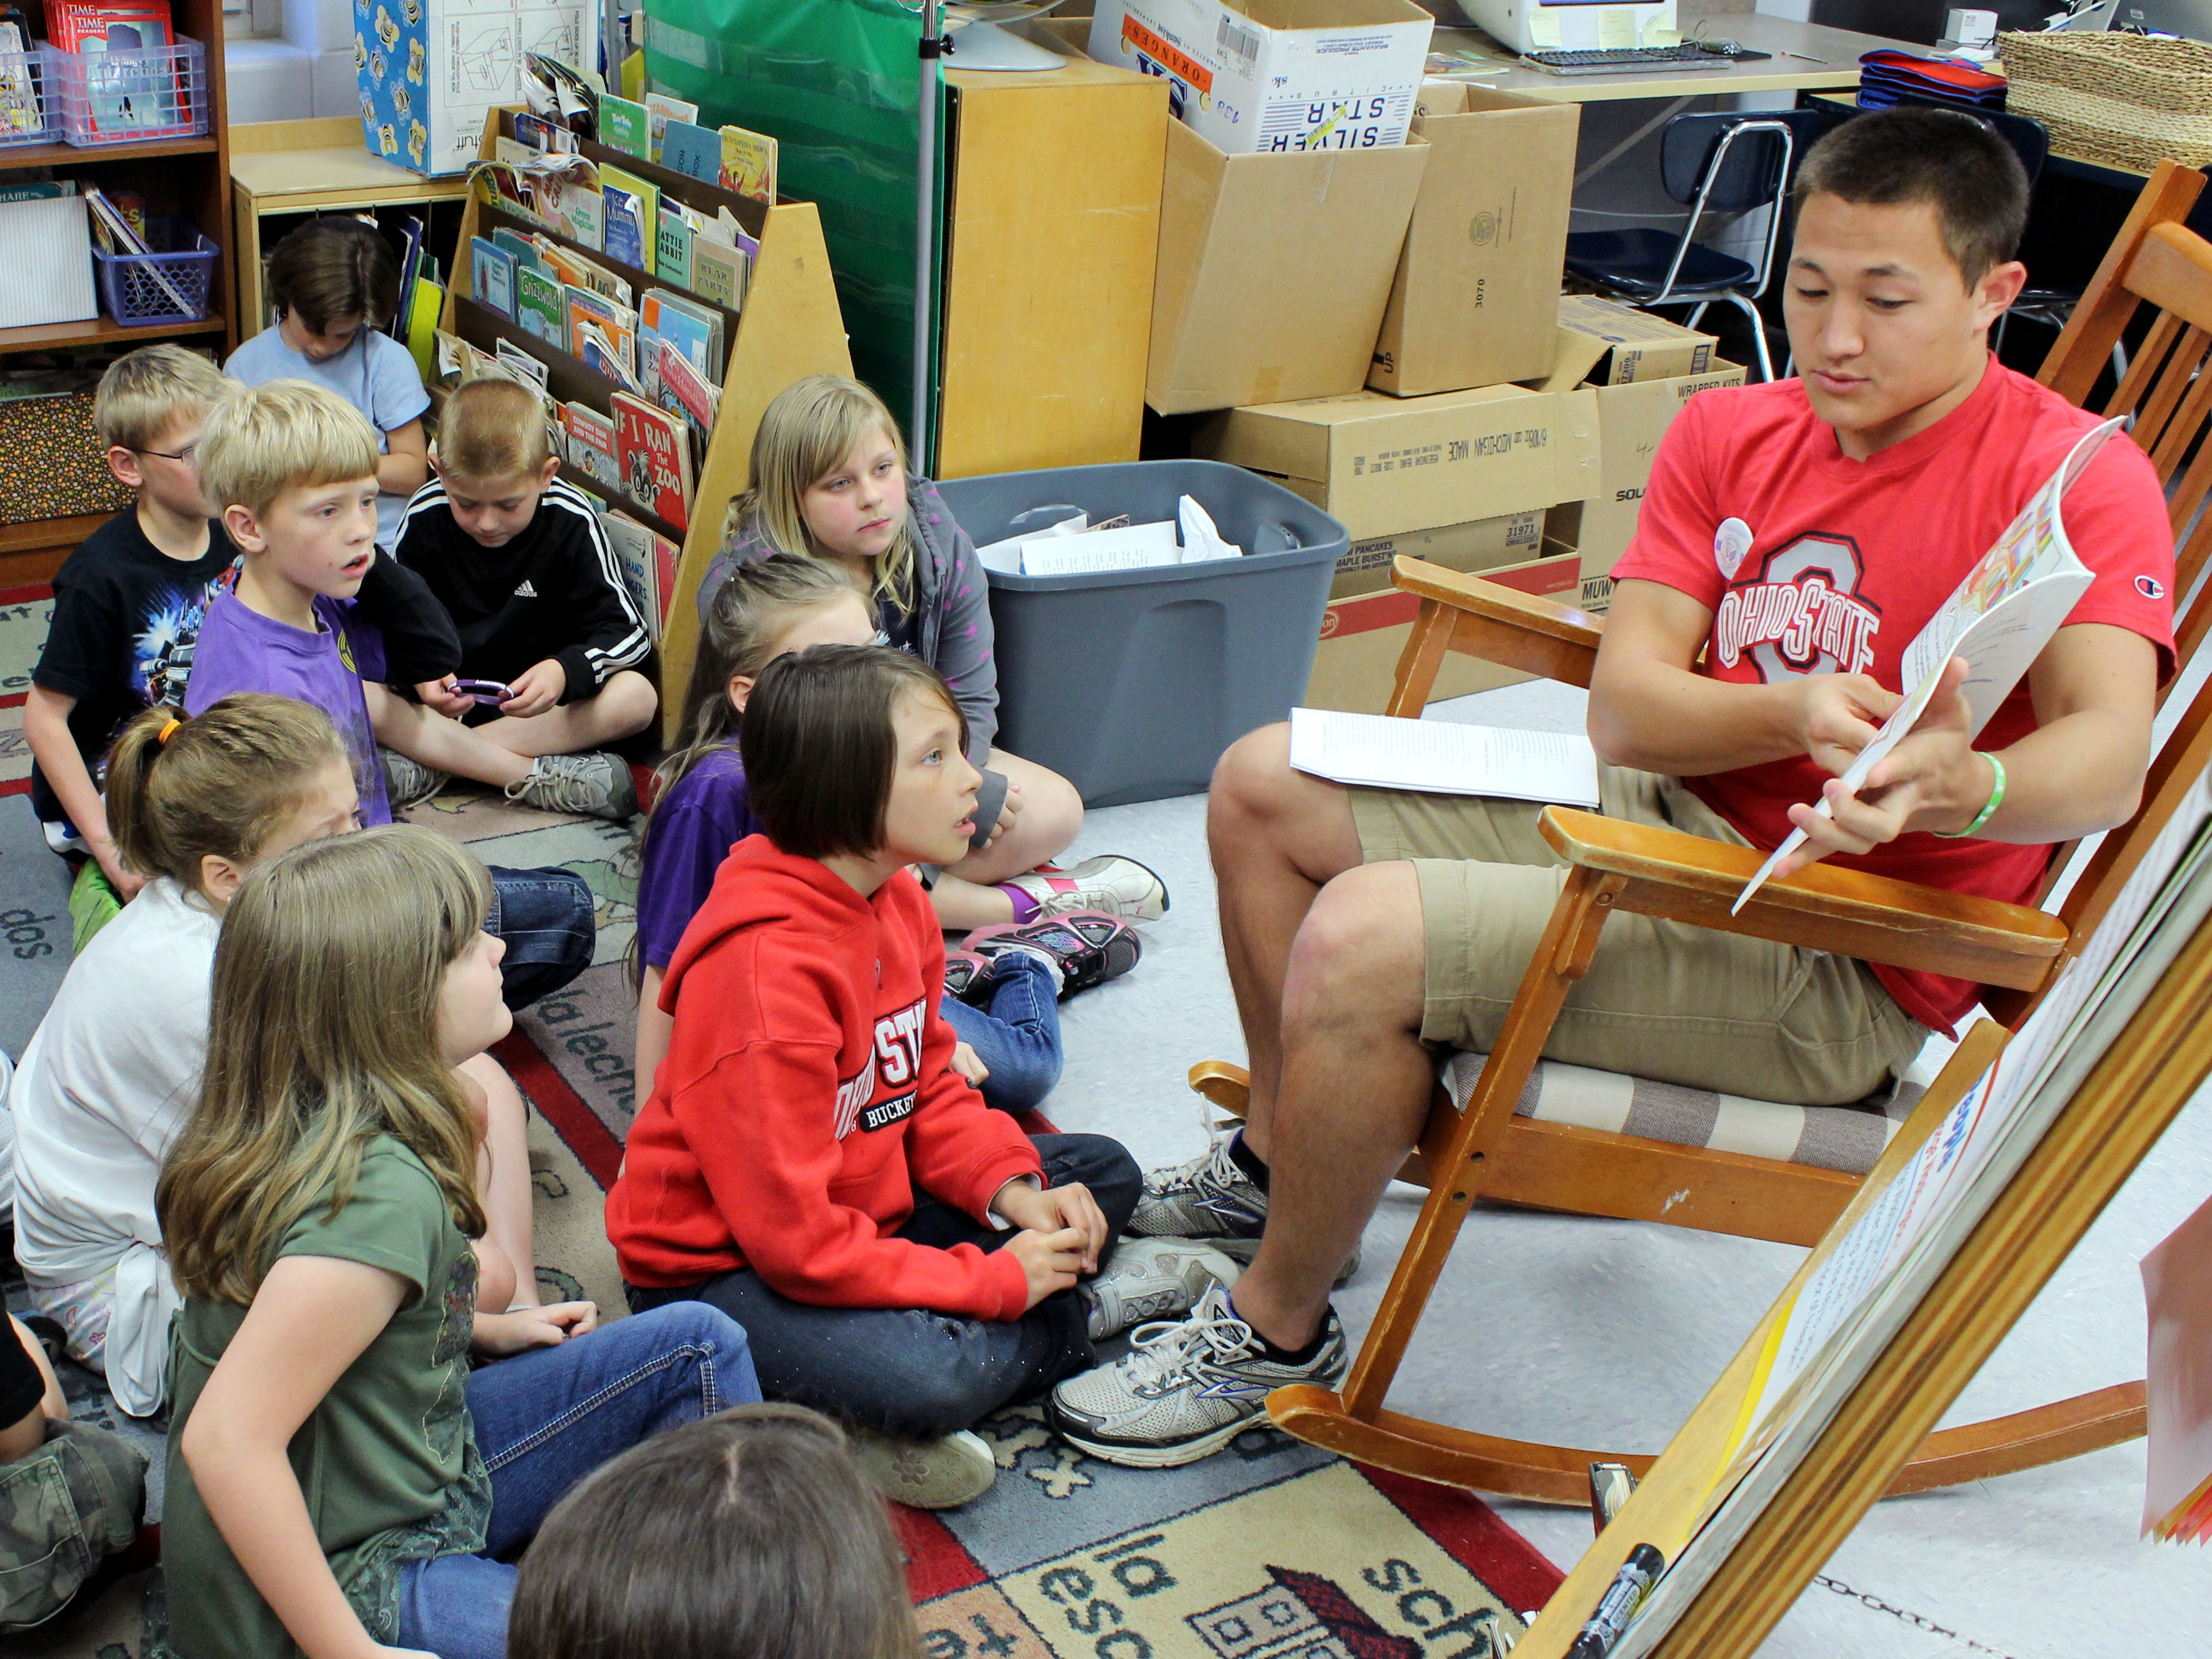 A college student reading to a group of young children.